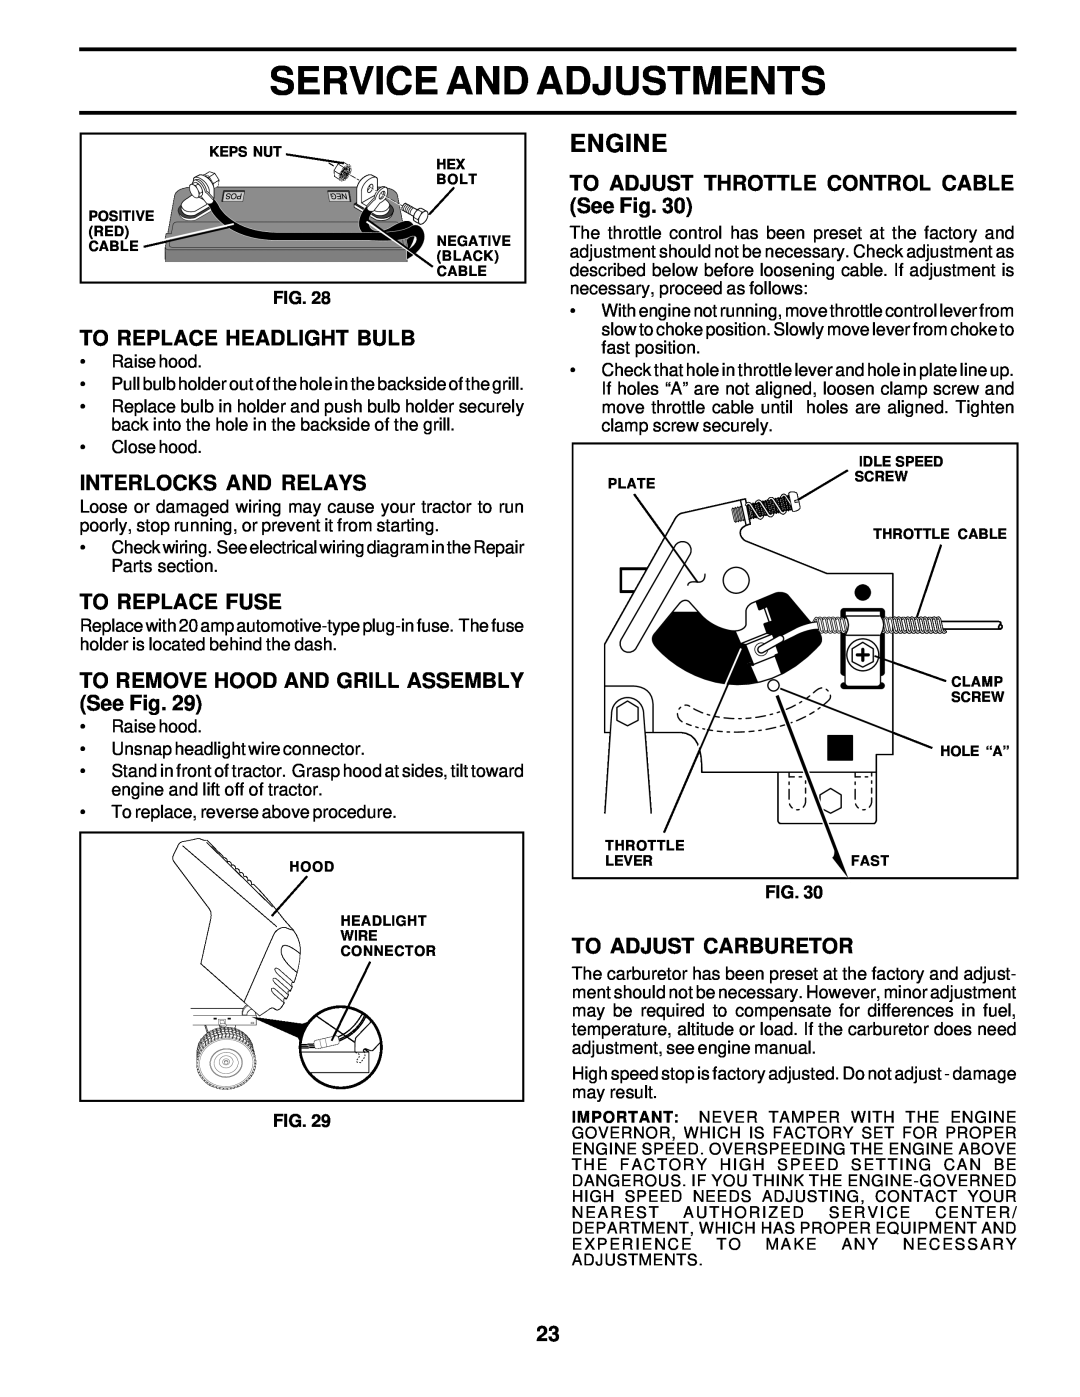 Weed Eater 177019 manual To Replace Headlight Bulb, Interlocks And Relays, To Replace Fuse, To Adjust Carburetor, Engine 